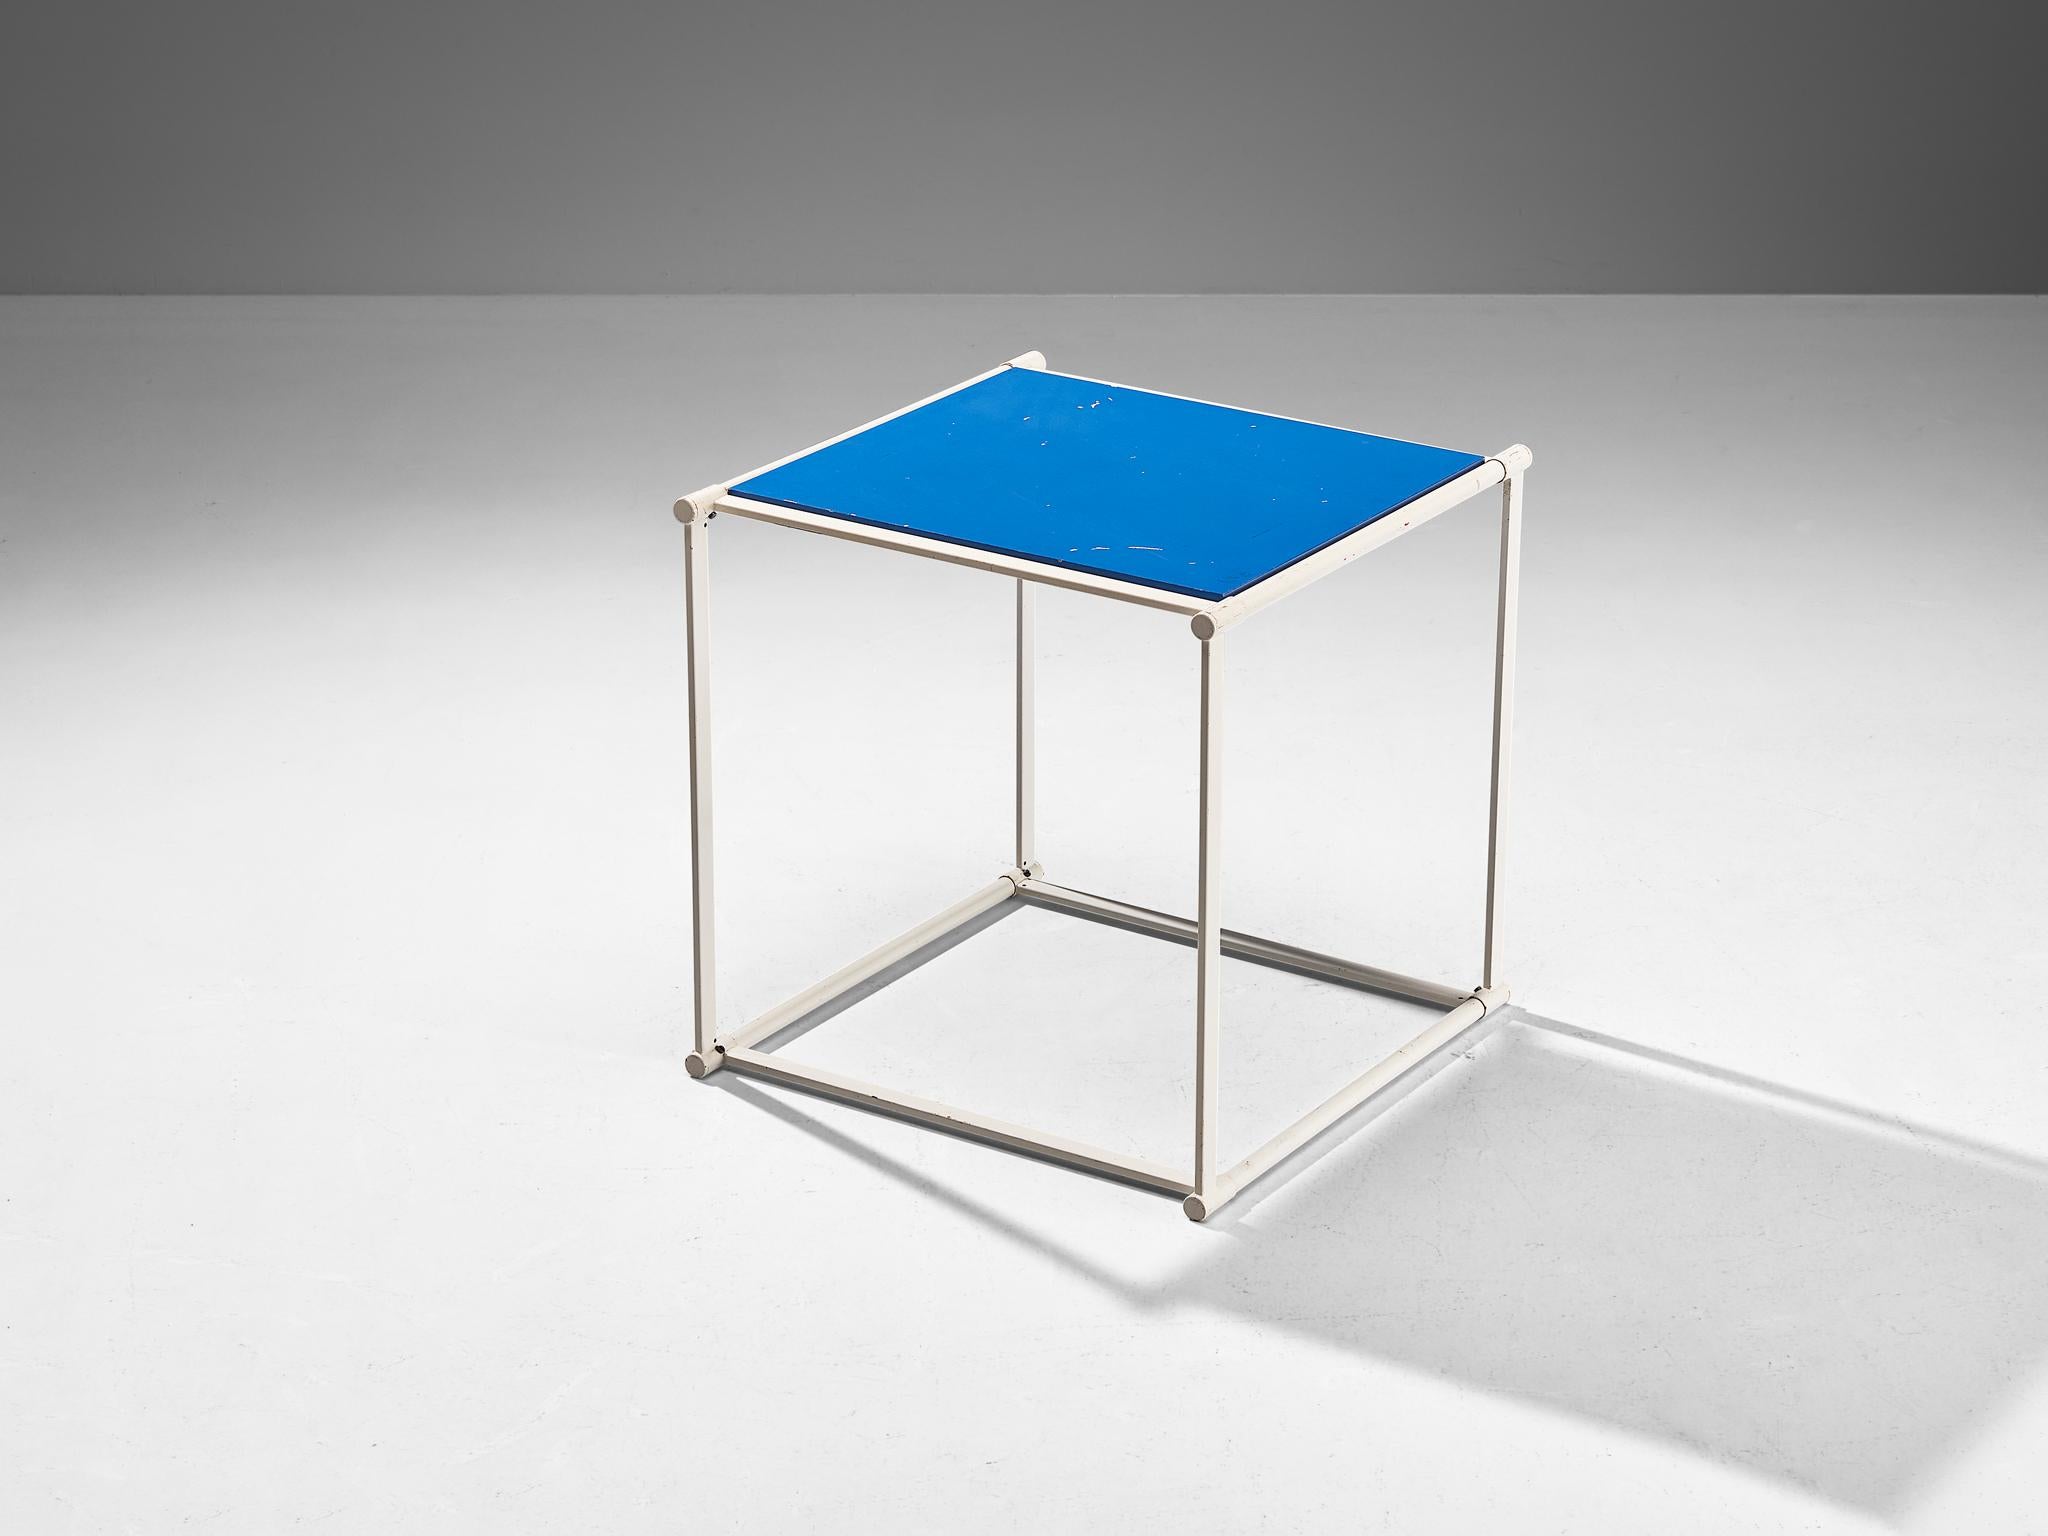 Radboud van Beekum for Pastoe, side table, model TM61, lacquered wood, lacquered steel, The Netherlands, 1980

This streamlined modern coffee table is designed by Dutch designer Radboud van Beekum for Pastoe. The square top is executed in blue